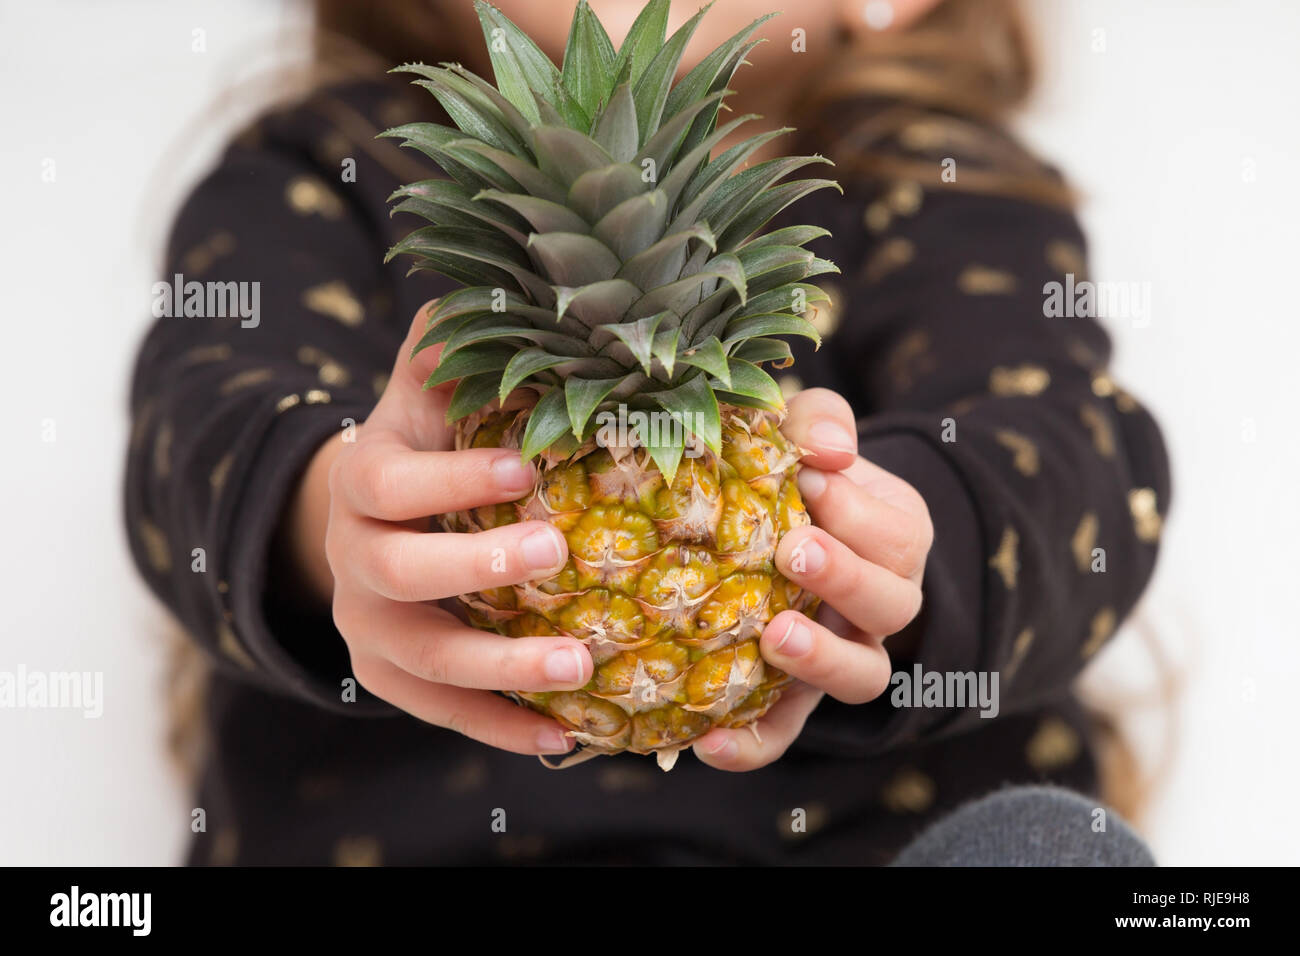 A Little Girl Holding Organic Healthy Pineapple Fruit Stock Photo